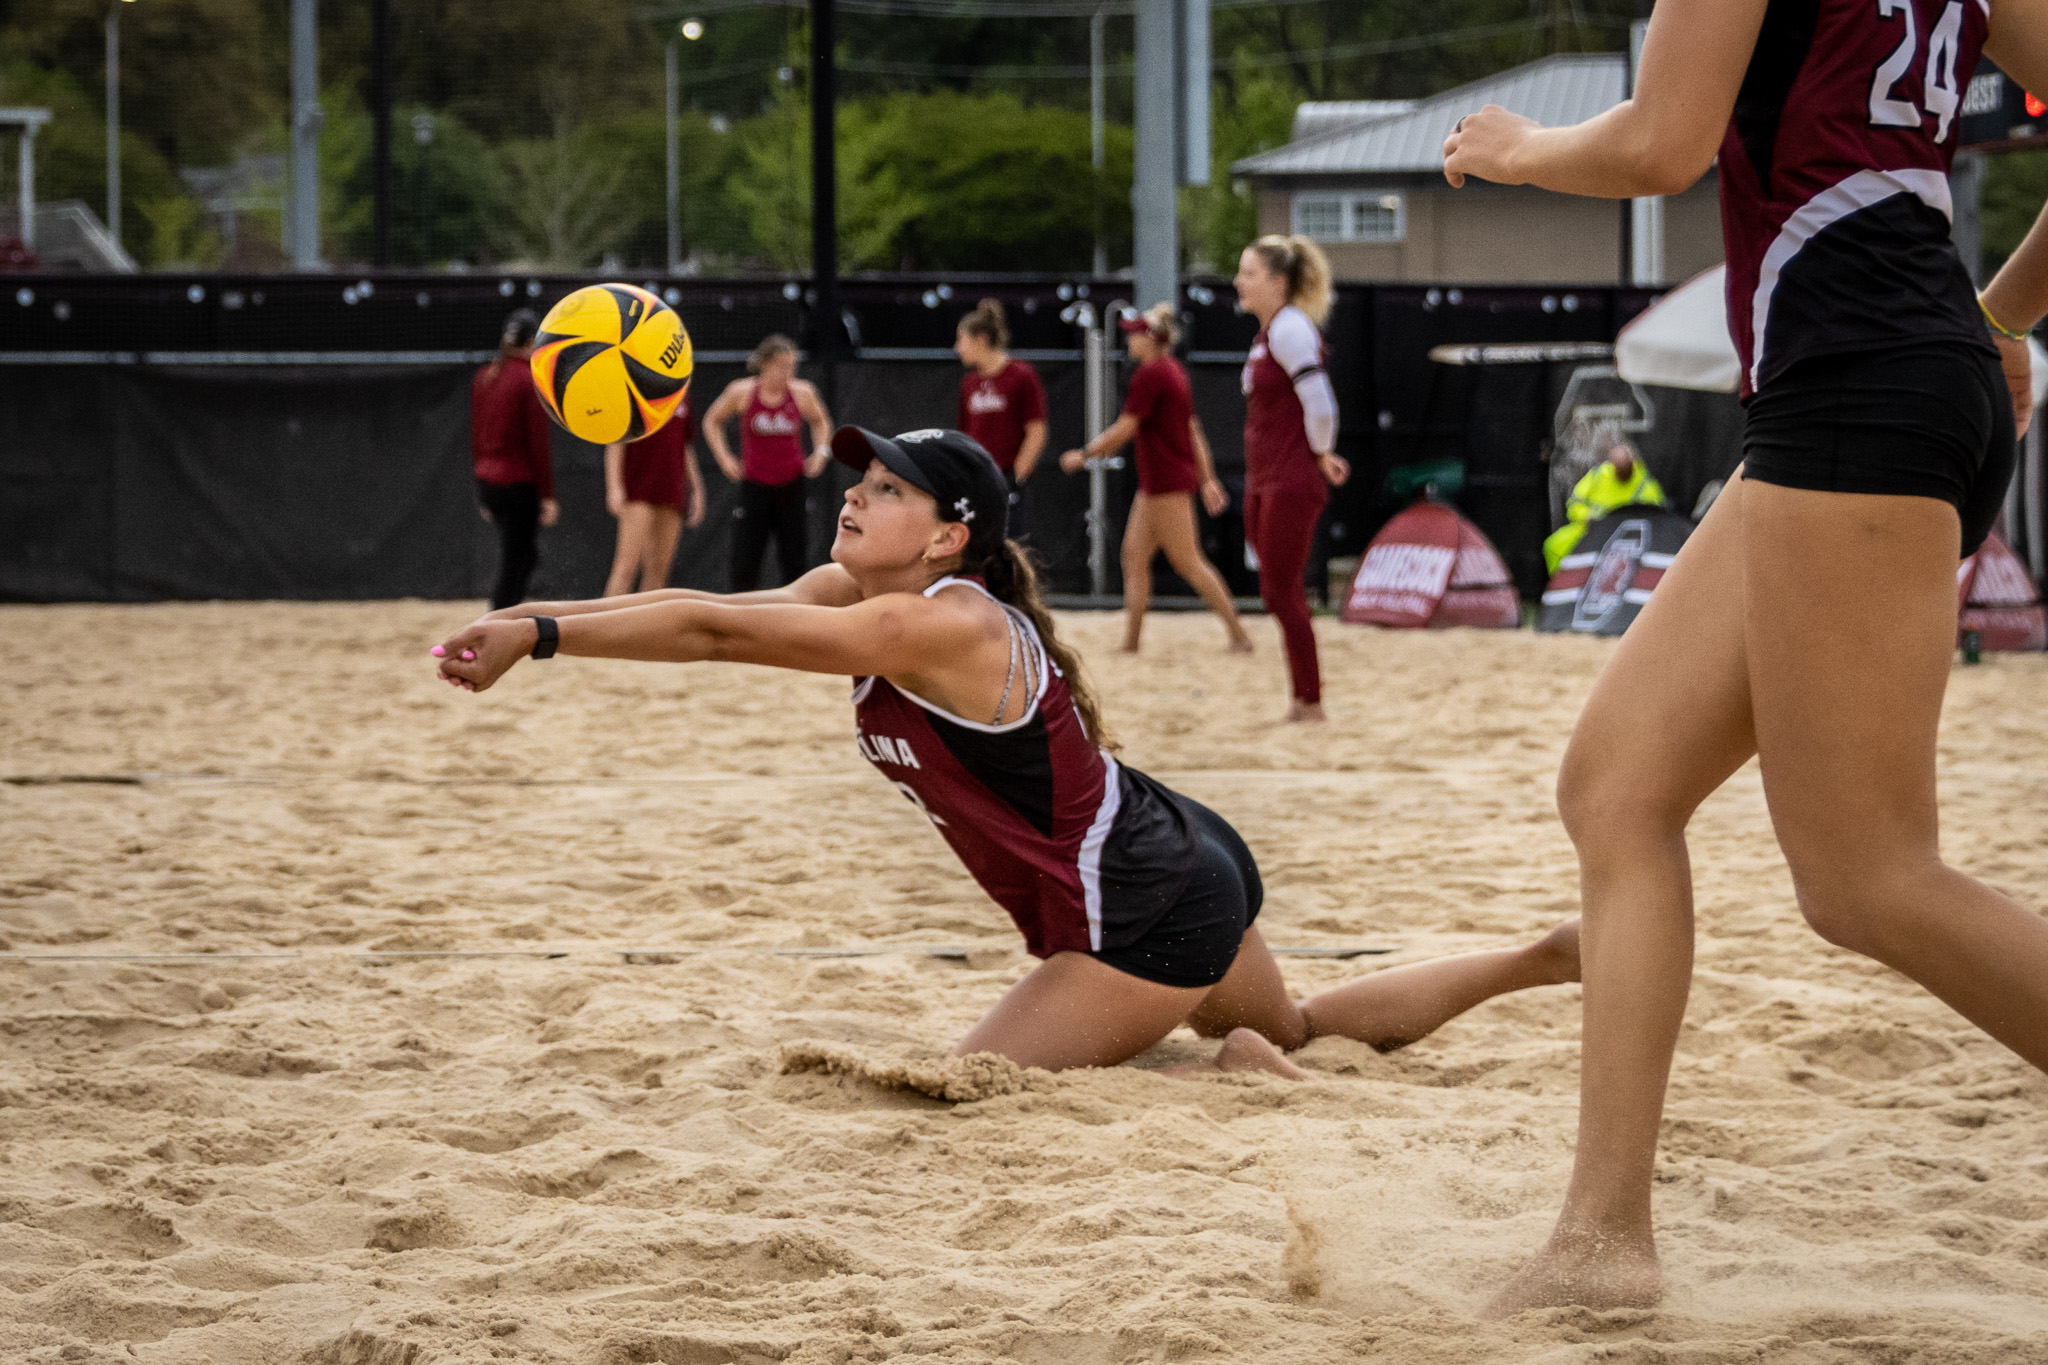 Gamecocks Drop 3-2 Decision to No. 11 Georgia State in Weather-Marred Sunday